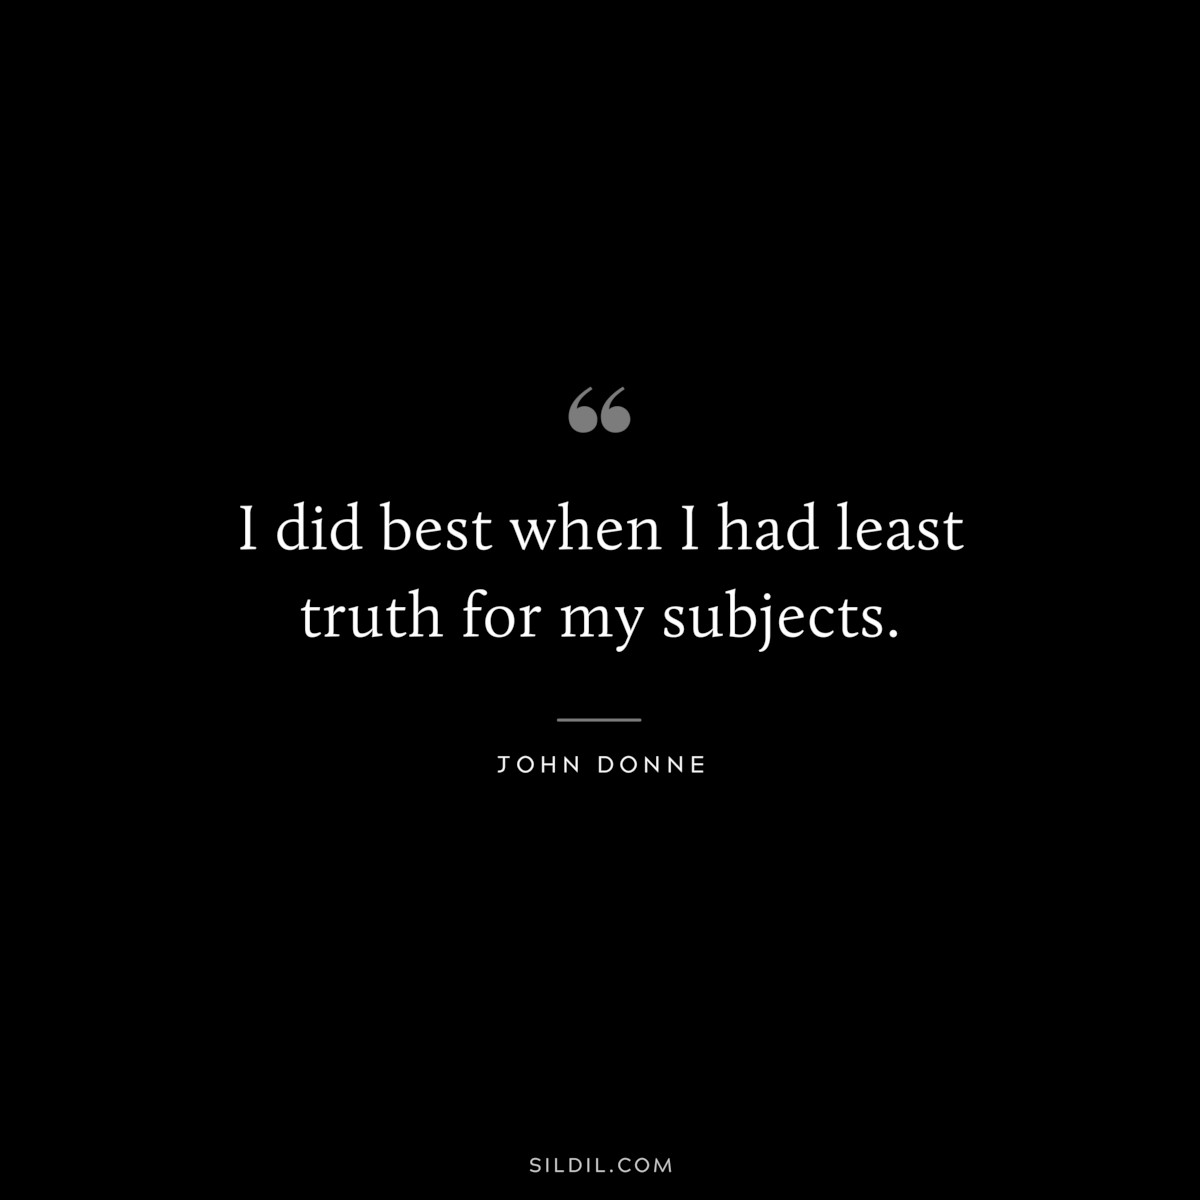 I did best when I had least truth for my subjects. ― John Donne